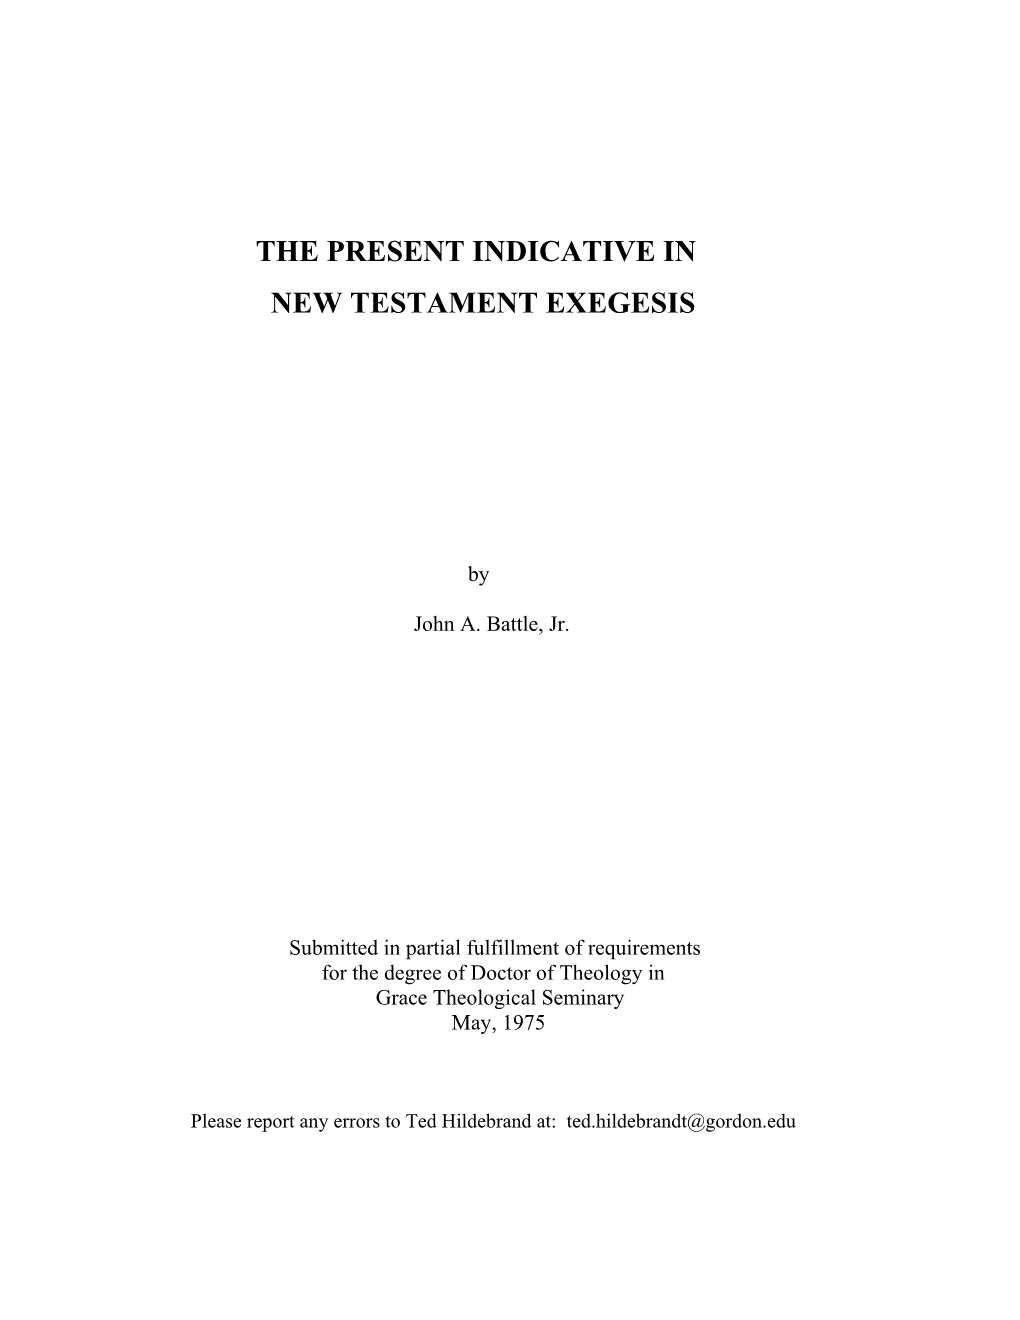 The Present Indicative in New Testament Exegesis